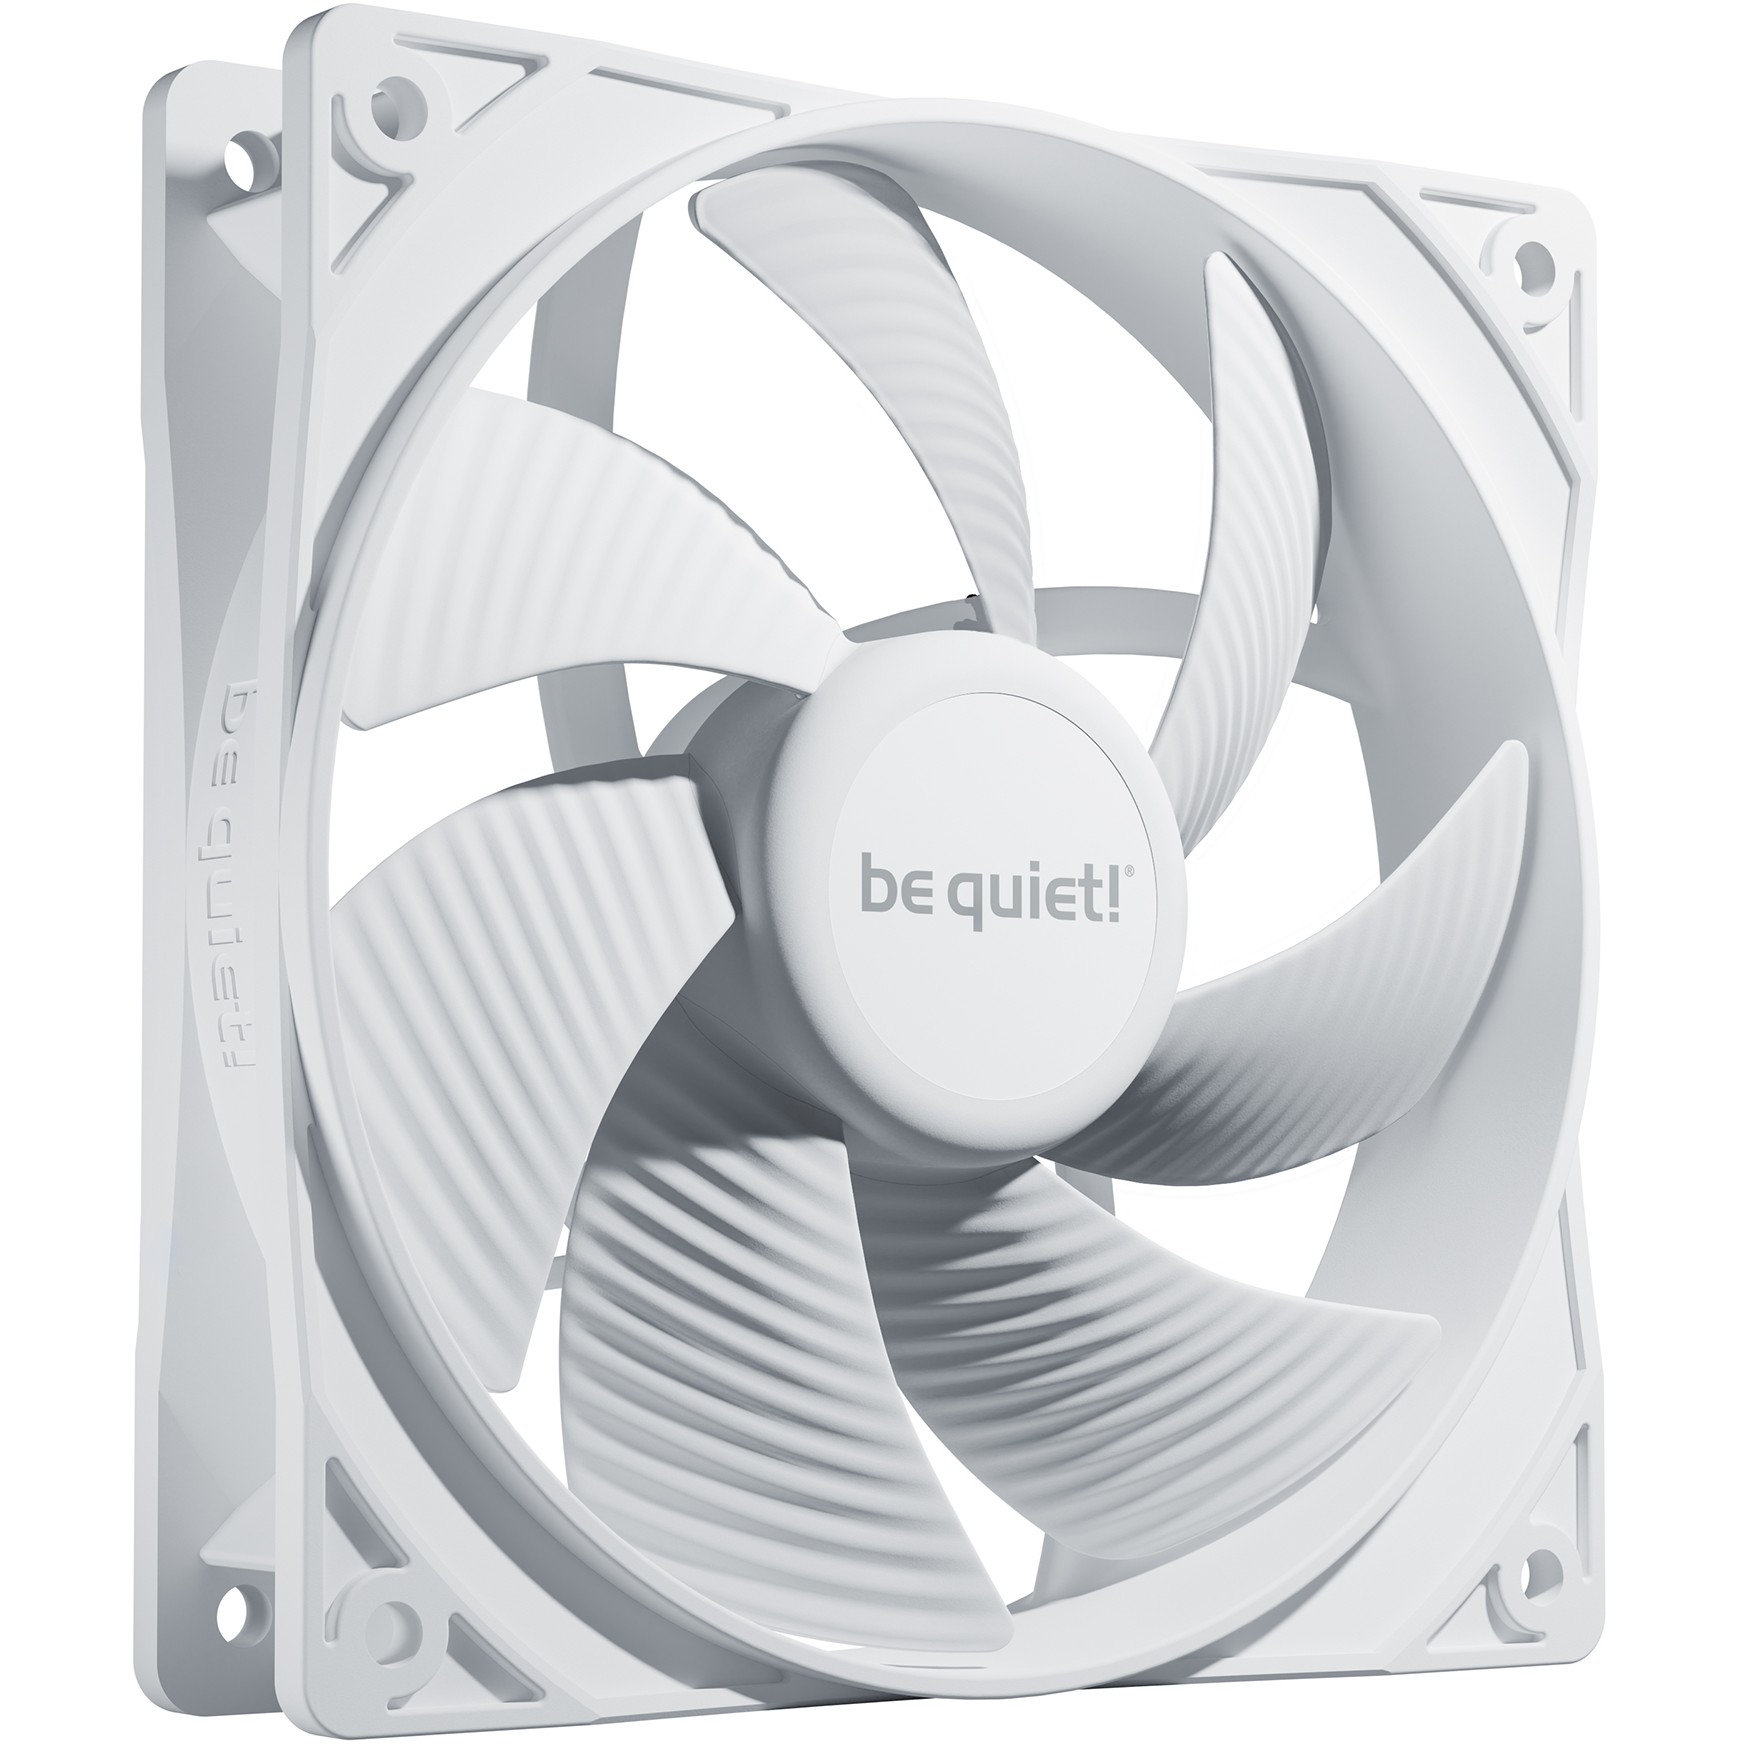 120mm be quiet! Pure Wings 3 PWM white